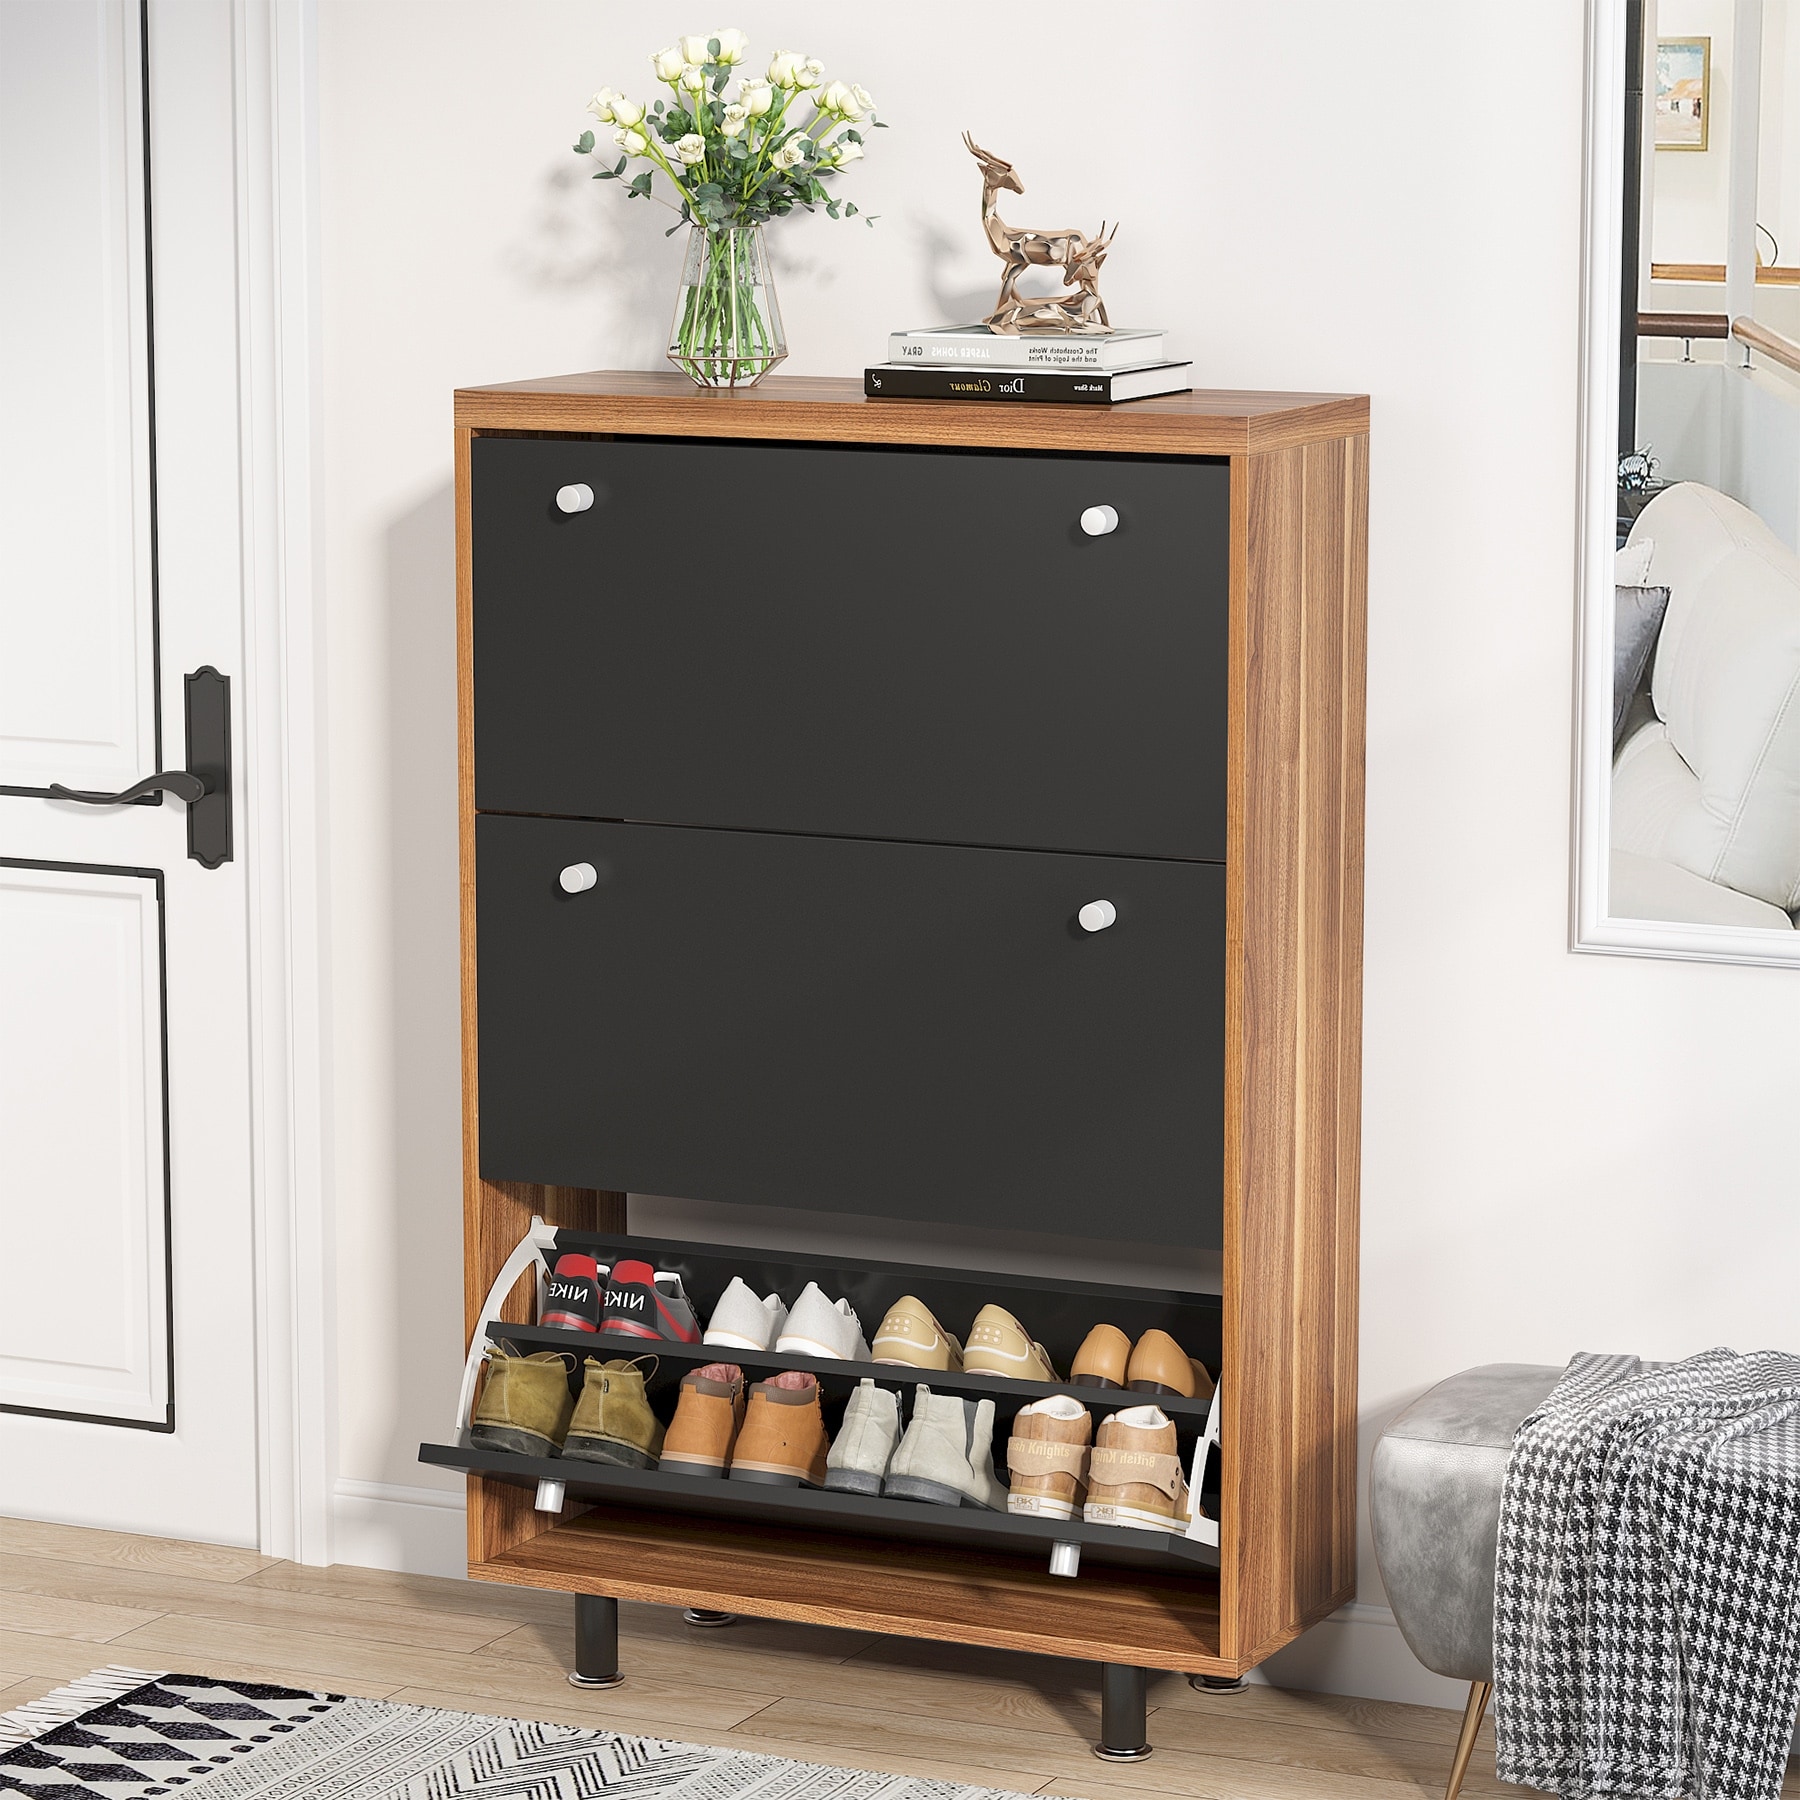 https://ak1.ostkcdn.com/images/products/is/images/direct/5e4bc04fdaff6a98e379fe71dfe2e3934cbba7ed/Modern-Shoe-Cabinet-for-Entryway%2C-Hallway%2C-Bedroom.jpg